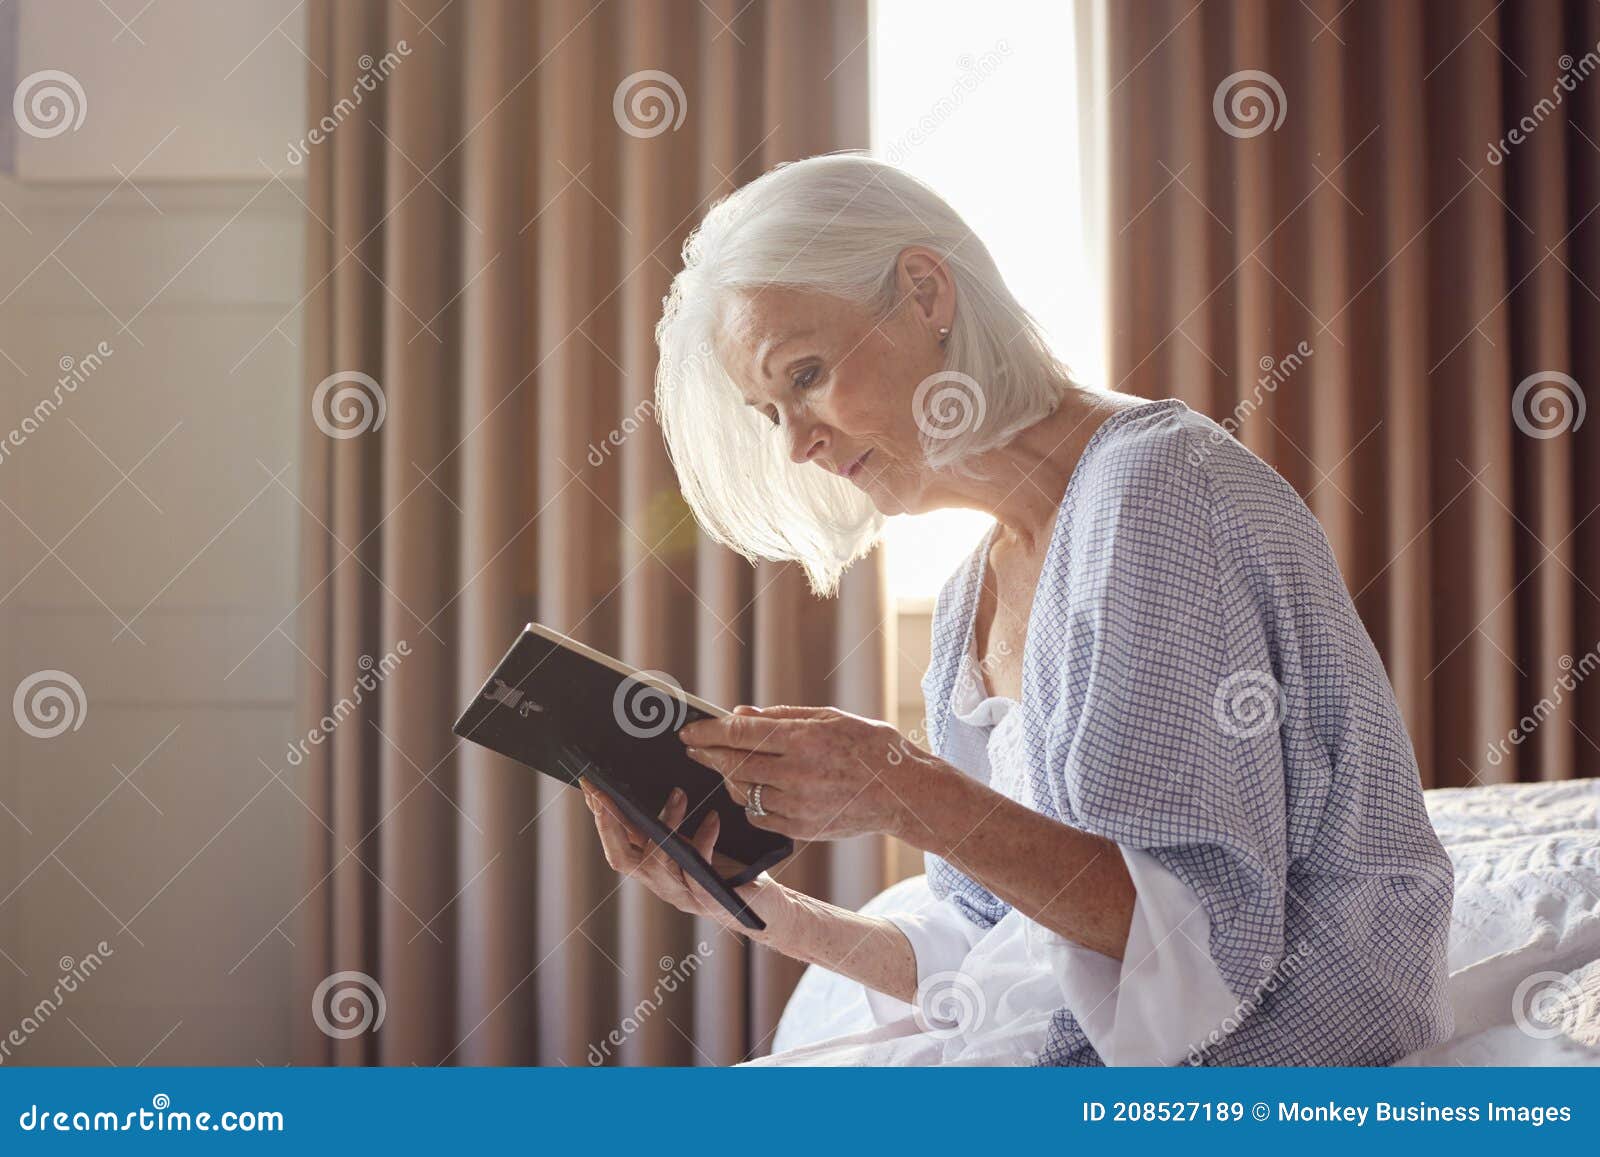 bereaved senior woman sitting on edge of bed looking at photo in frame